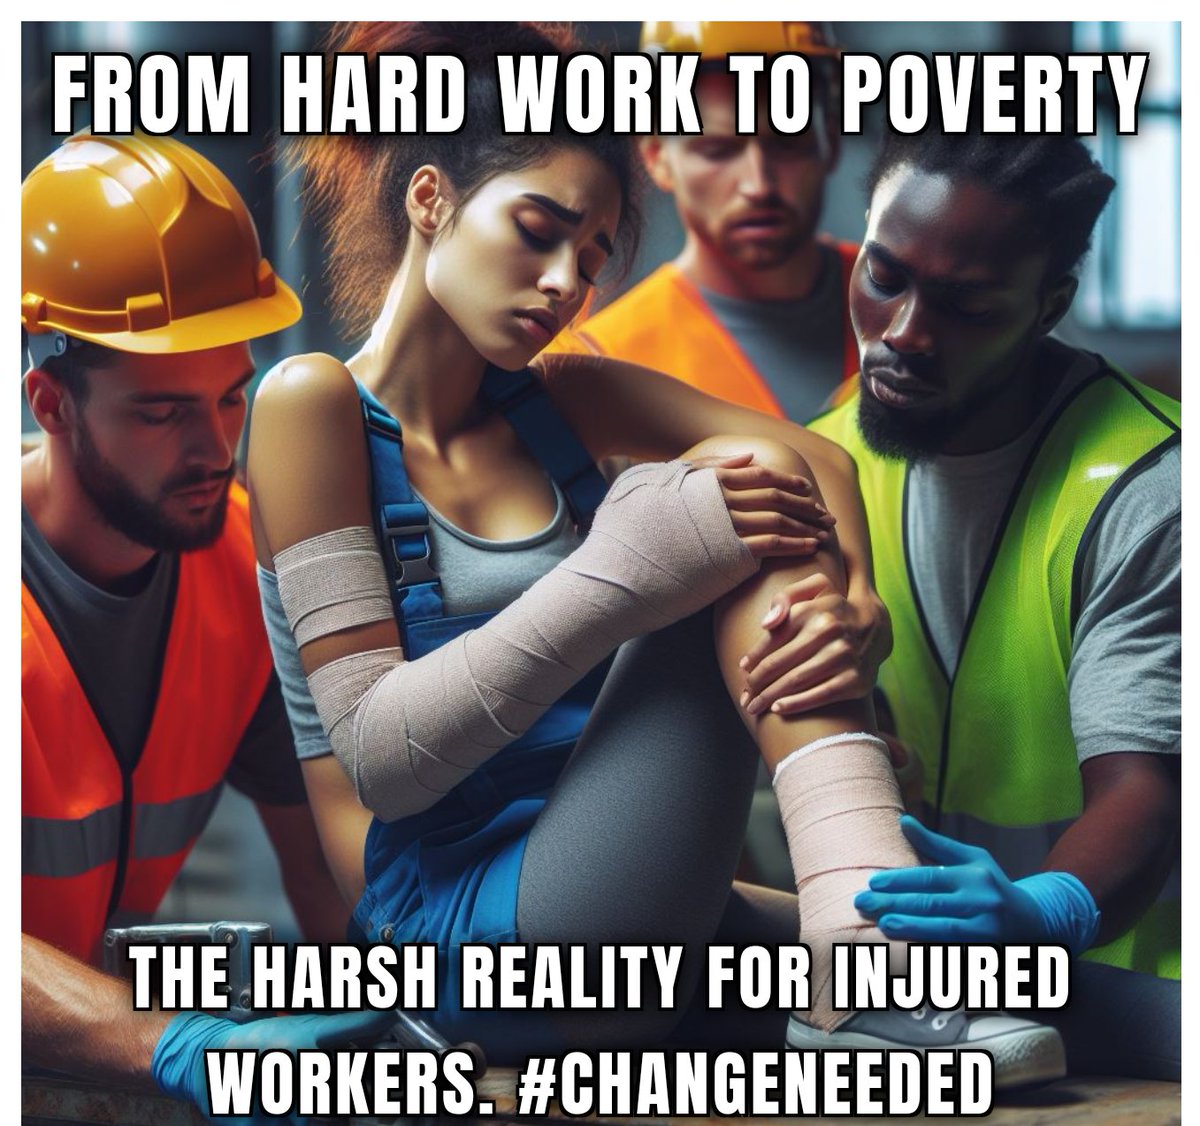 From hard work to poverty: 
the harsh reality faced by #InjuredWorkers. 
Change is desperately needed. #WorkersRights #FairTreatment #wsib #wcb